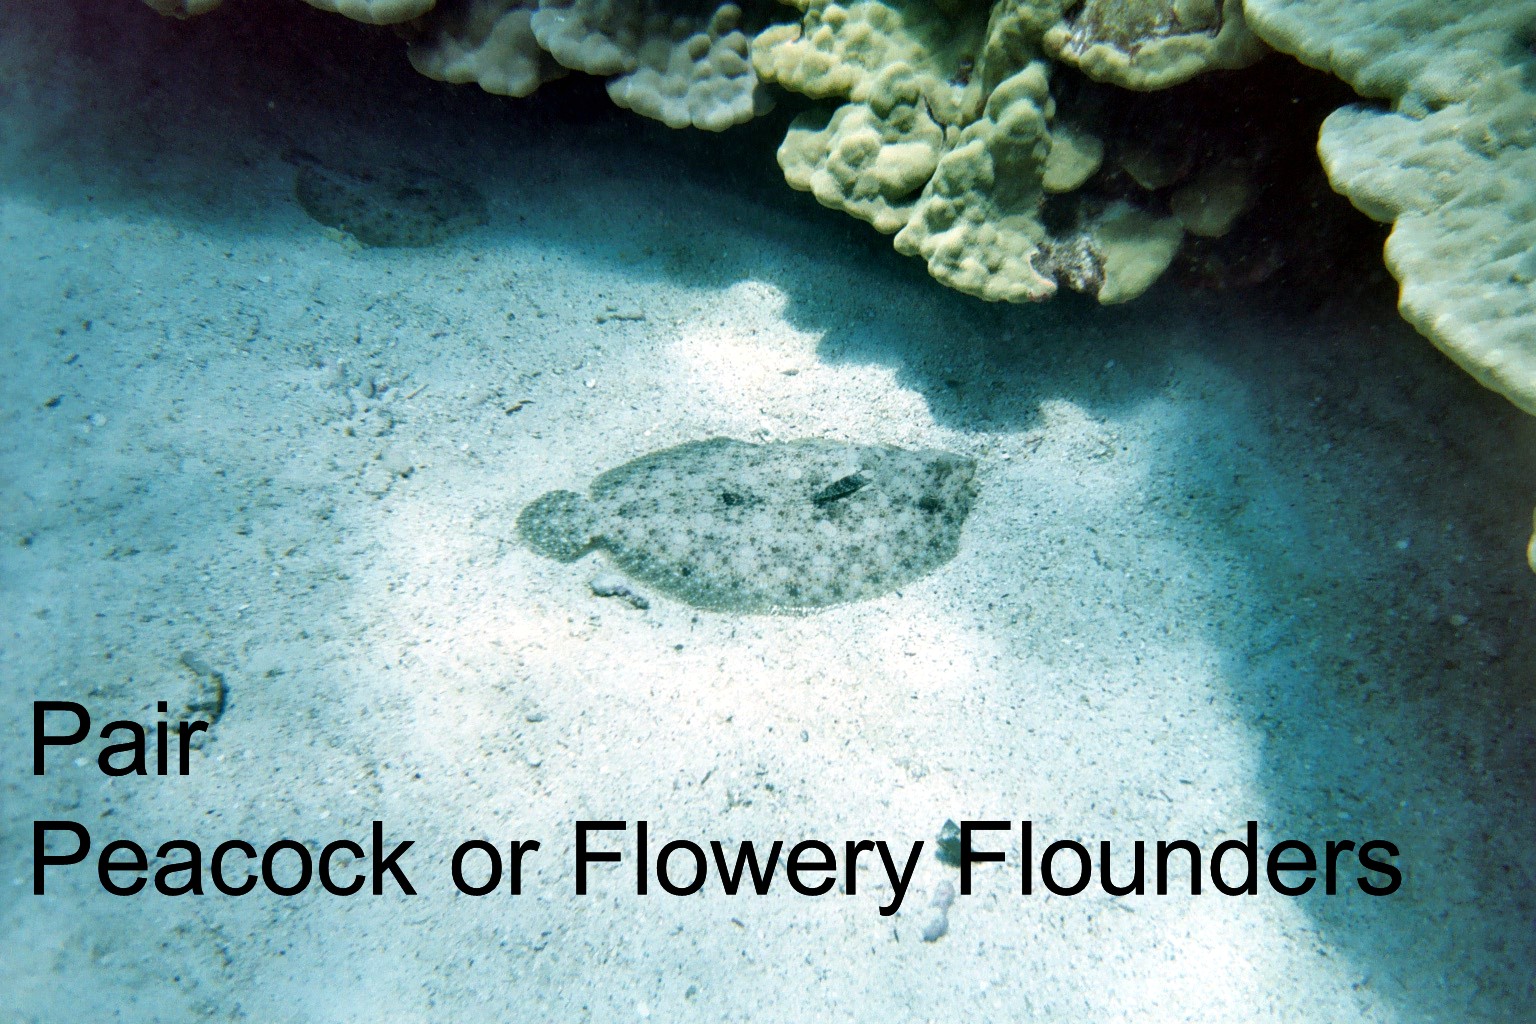 Pair of Peacock (or correctly) Flowery Flounders